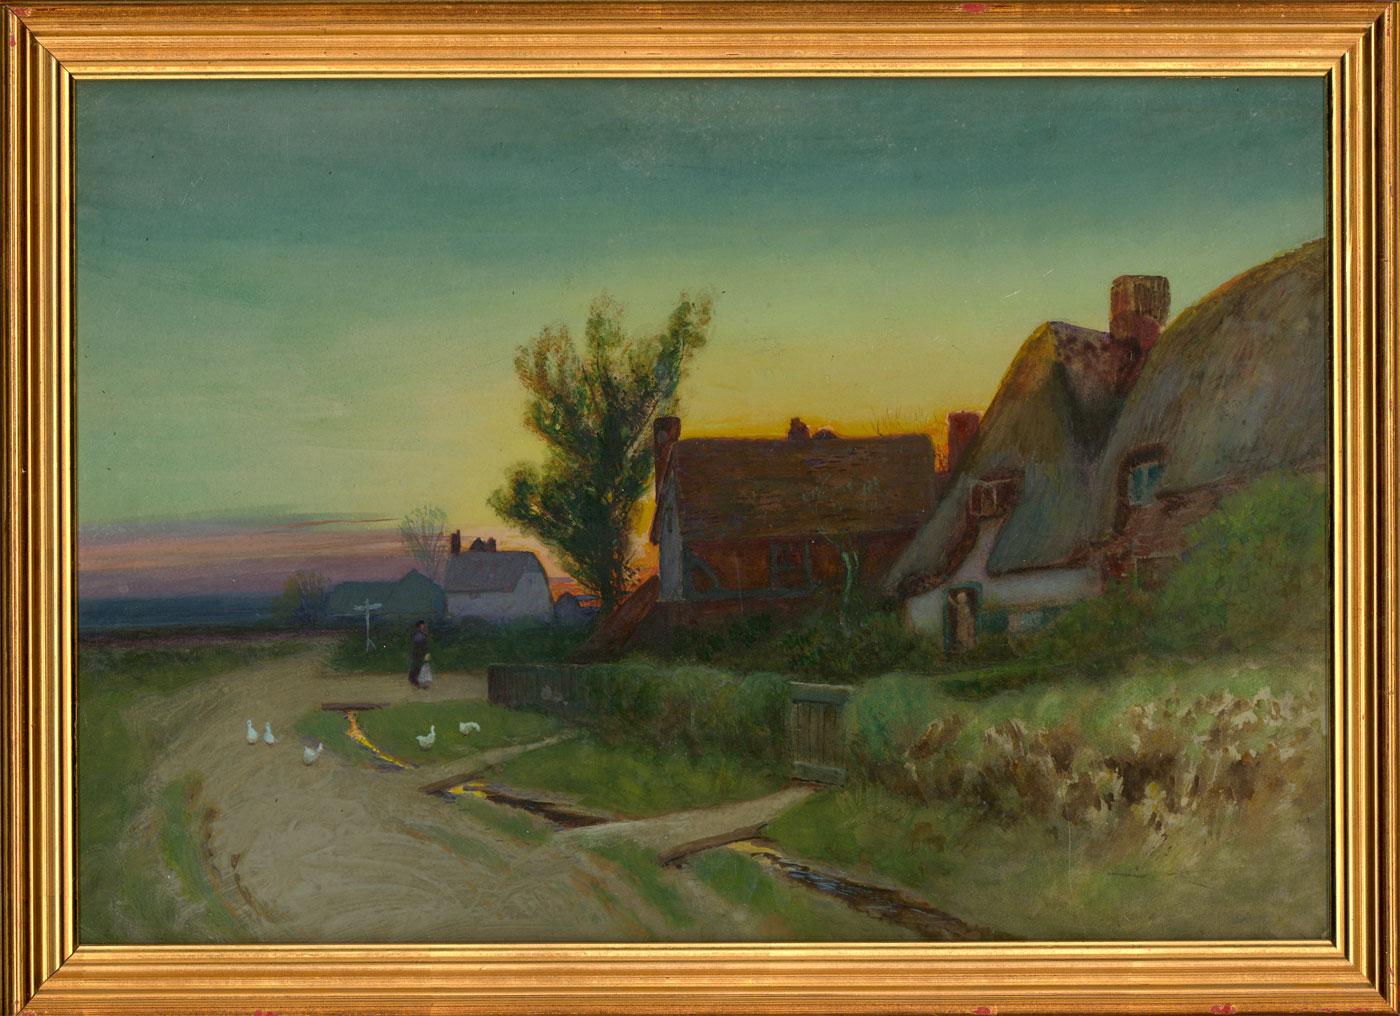 Unknown Landscape Art - Attributed to Leopold Rivers (1852-1905) - Gouache, Cottage in Sunset Landscape